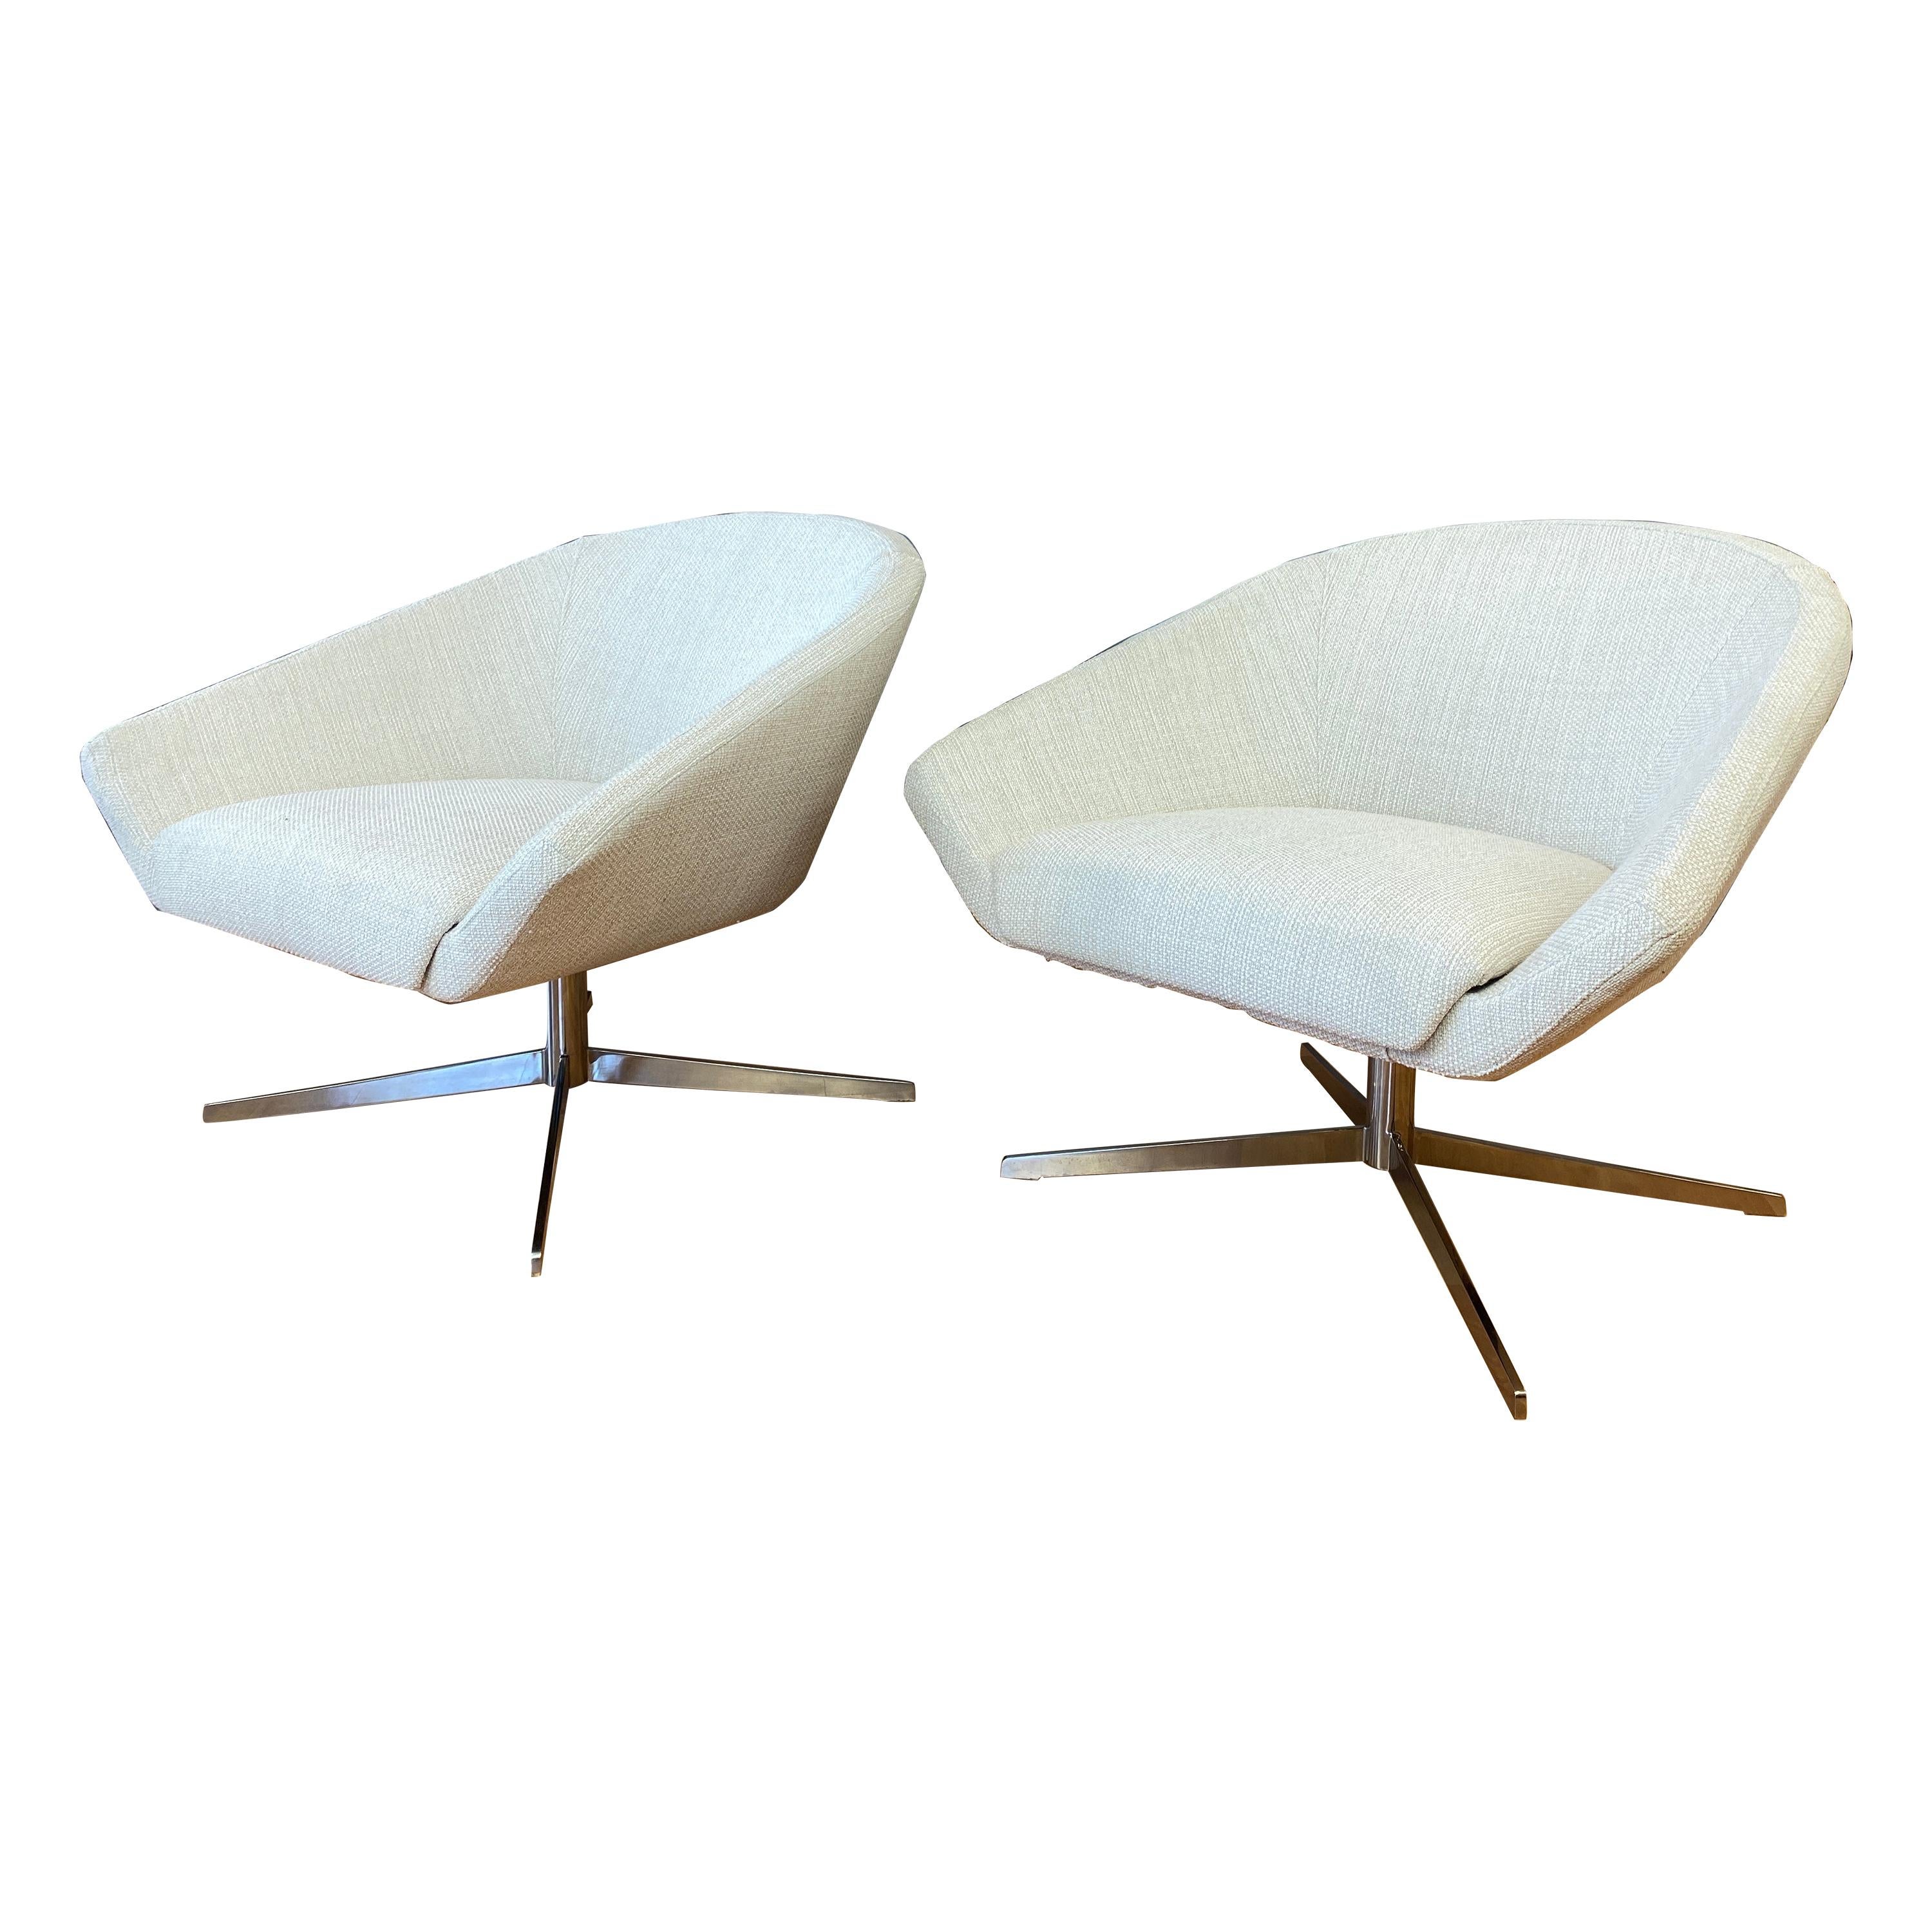 Pair of Remy Lounge Chairs by Jeffrey Bernett for Bernhardt Design